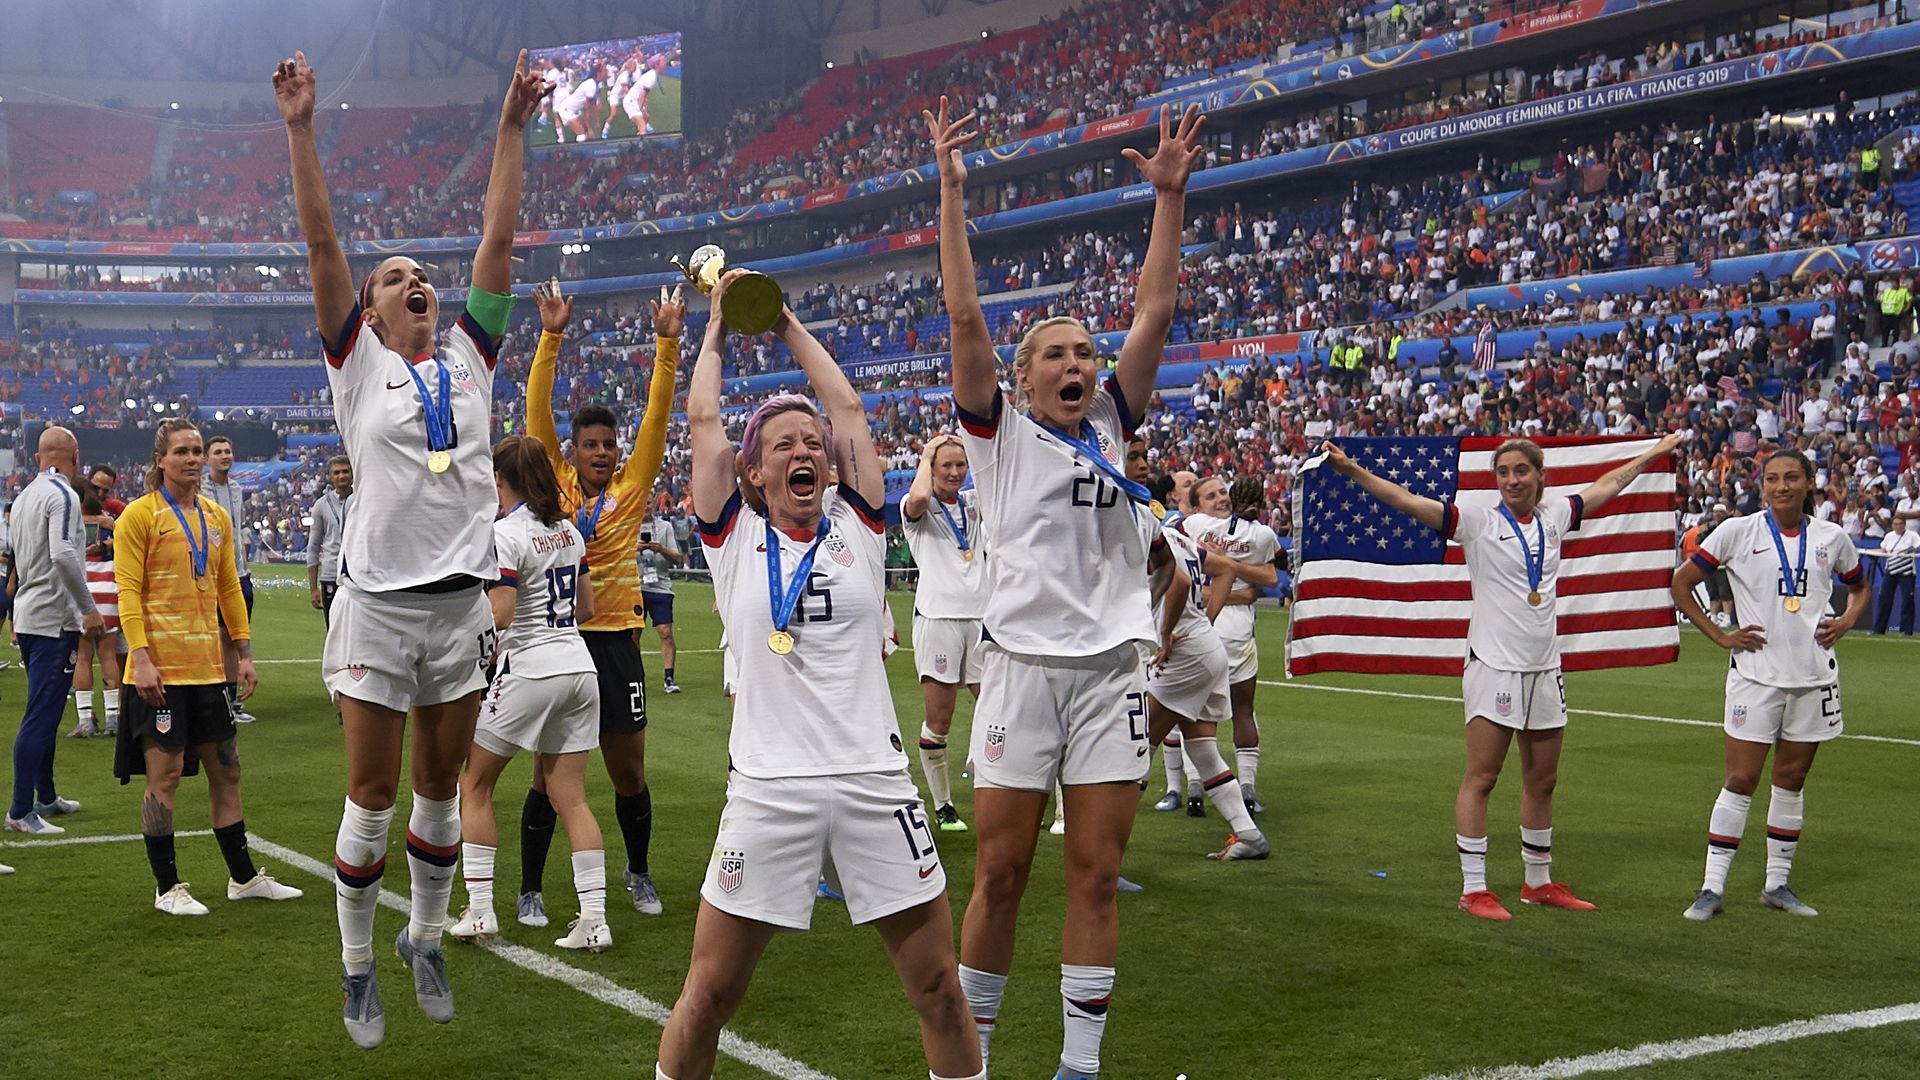 Megan Rapinoe (Reign FC) and Alex Morgan (Orlando Pride) of United States celebrate whit her teammates after winning the 2019 FIFA Women's World Cup France Final match 